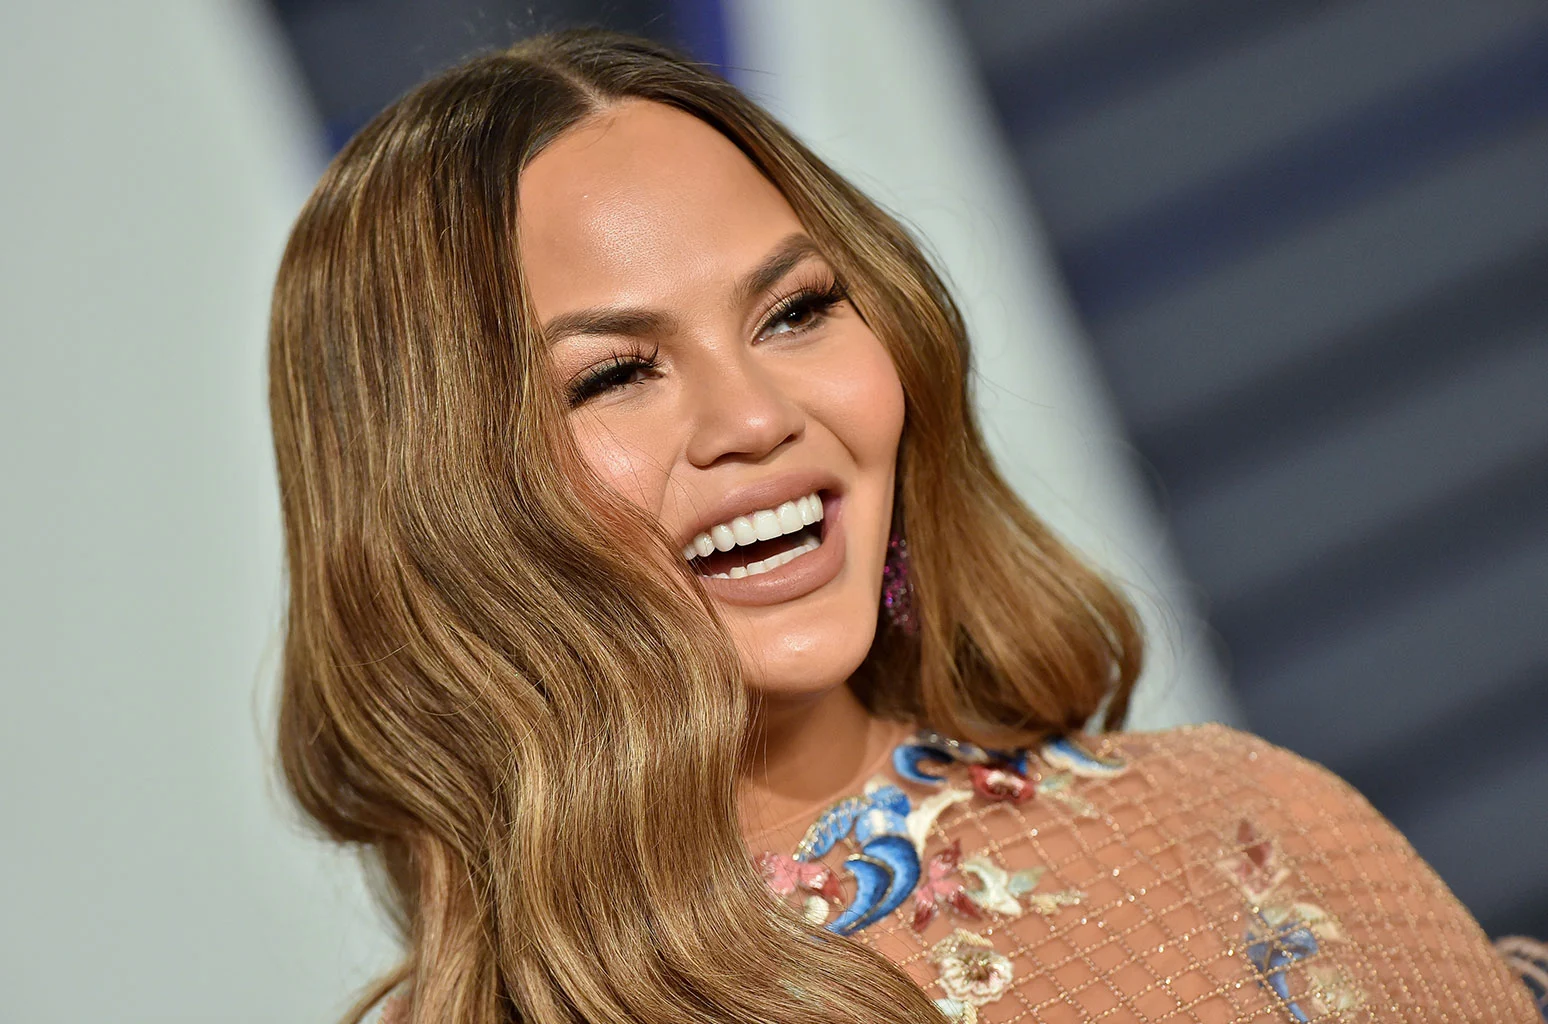 Nearly Two Years After The Death Of Her Son, Chrissy Teigen Announces She Is Pregnant